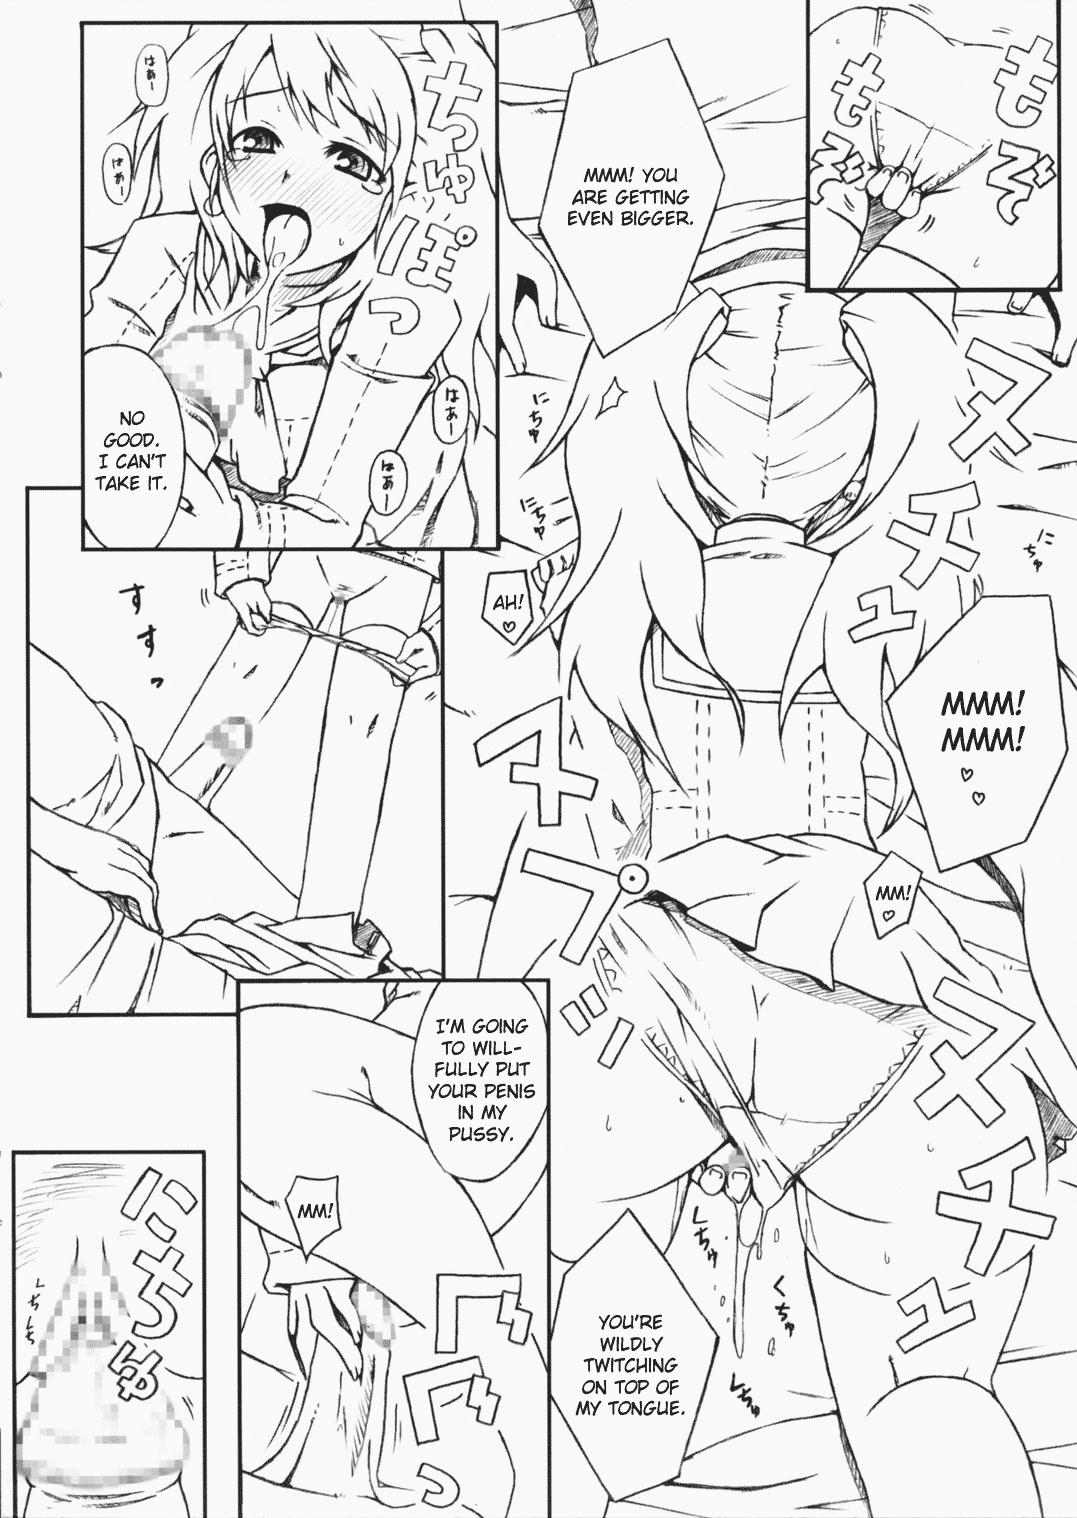 Outdoors DUO - Persona 4 Rough Sex - Page 5